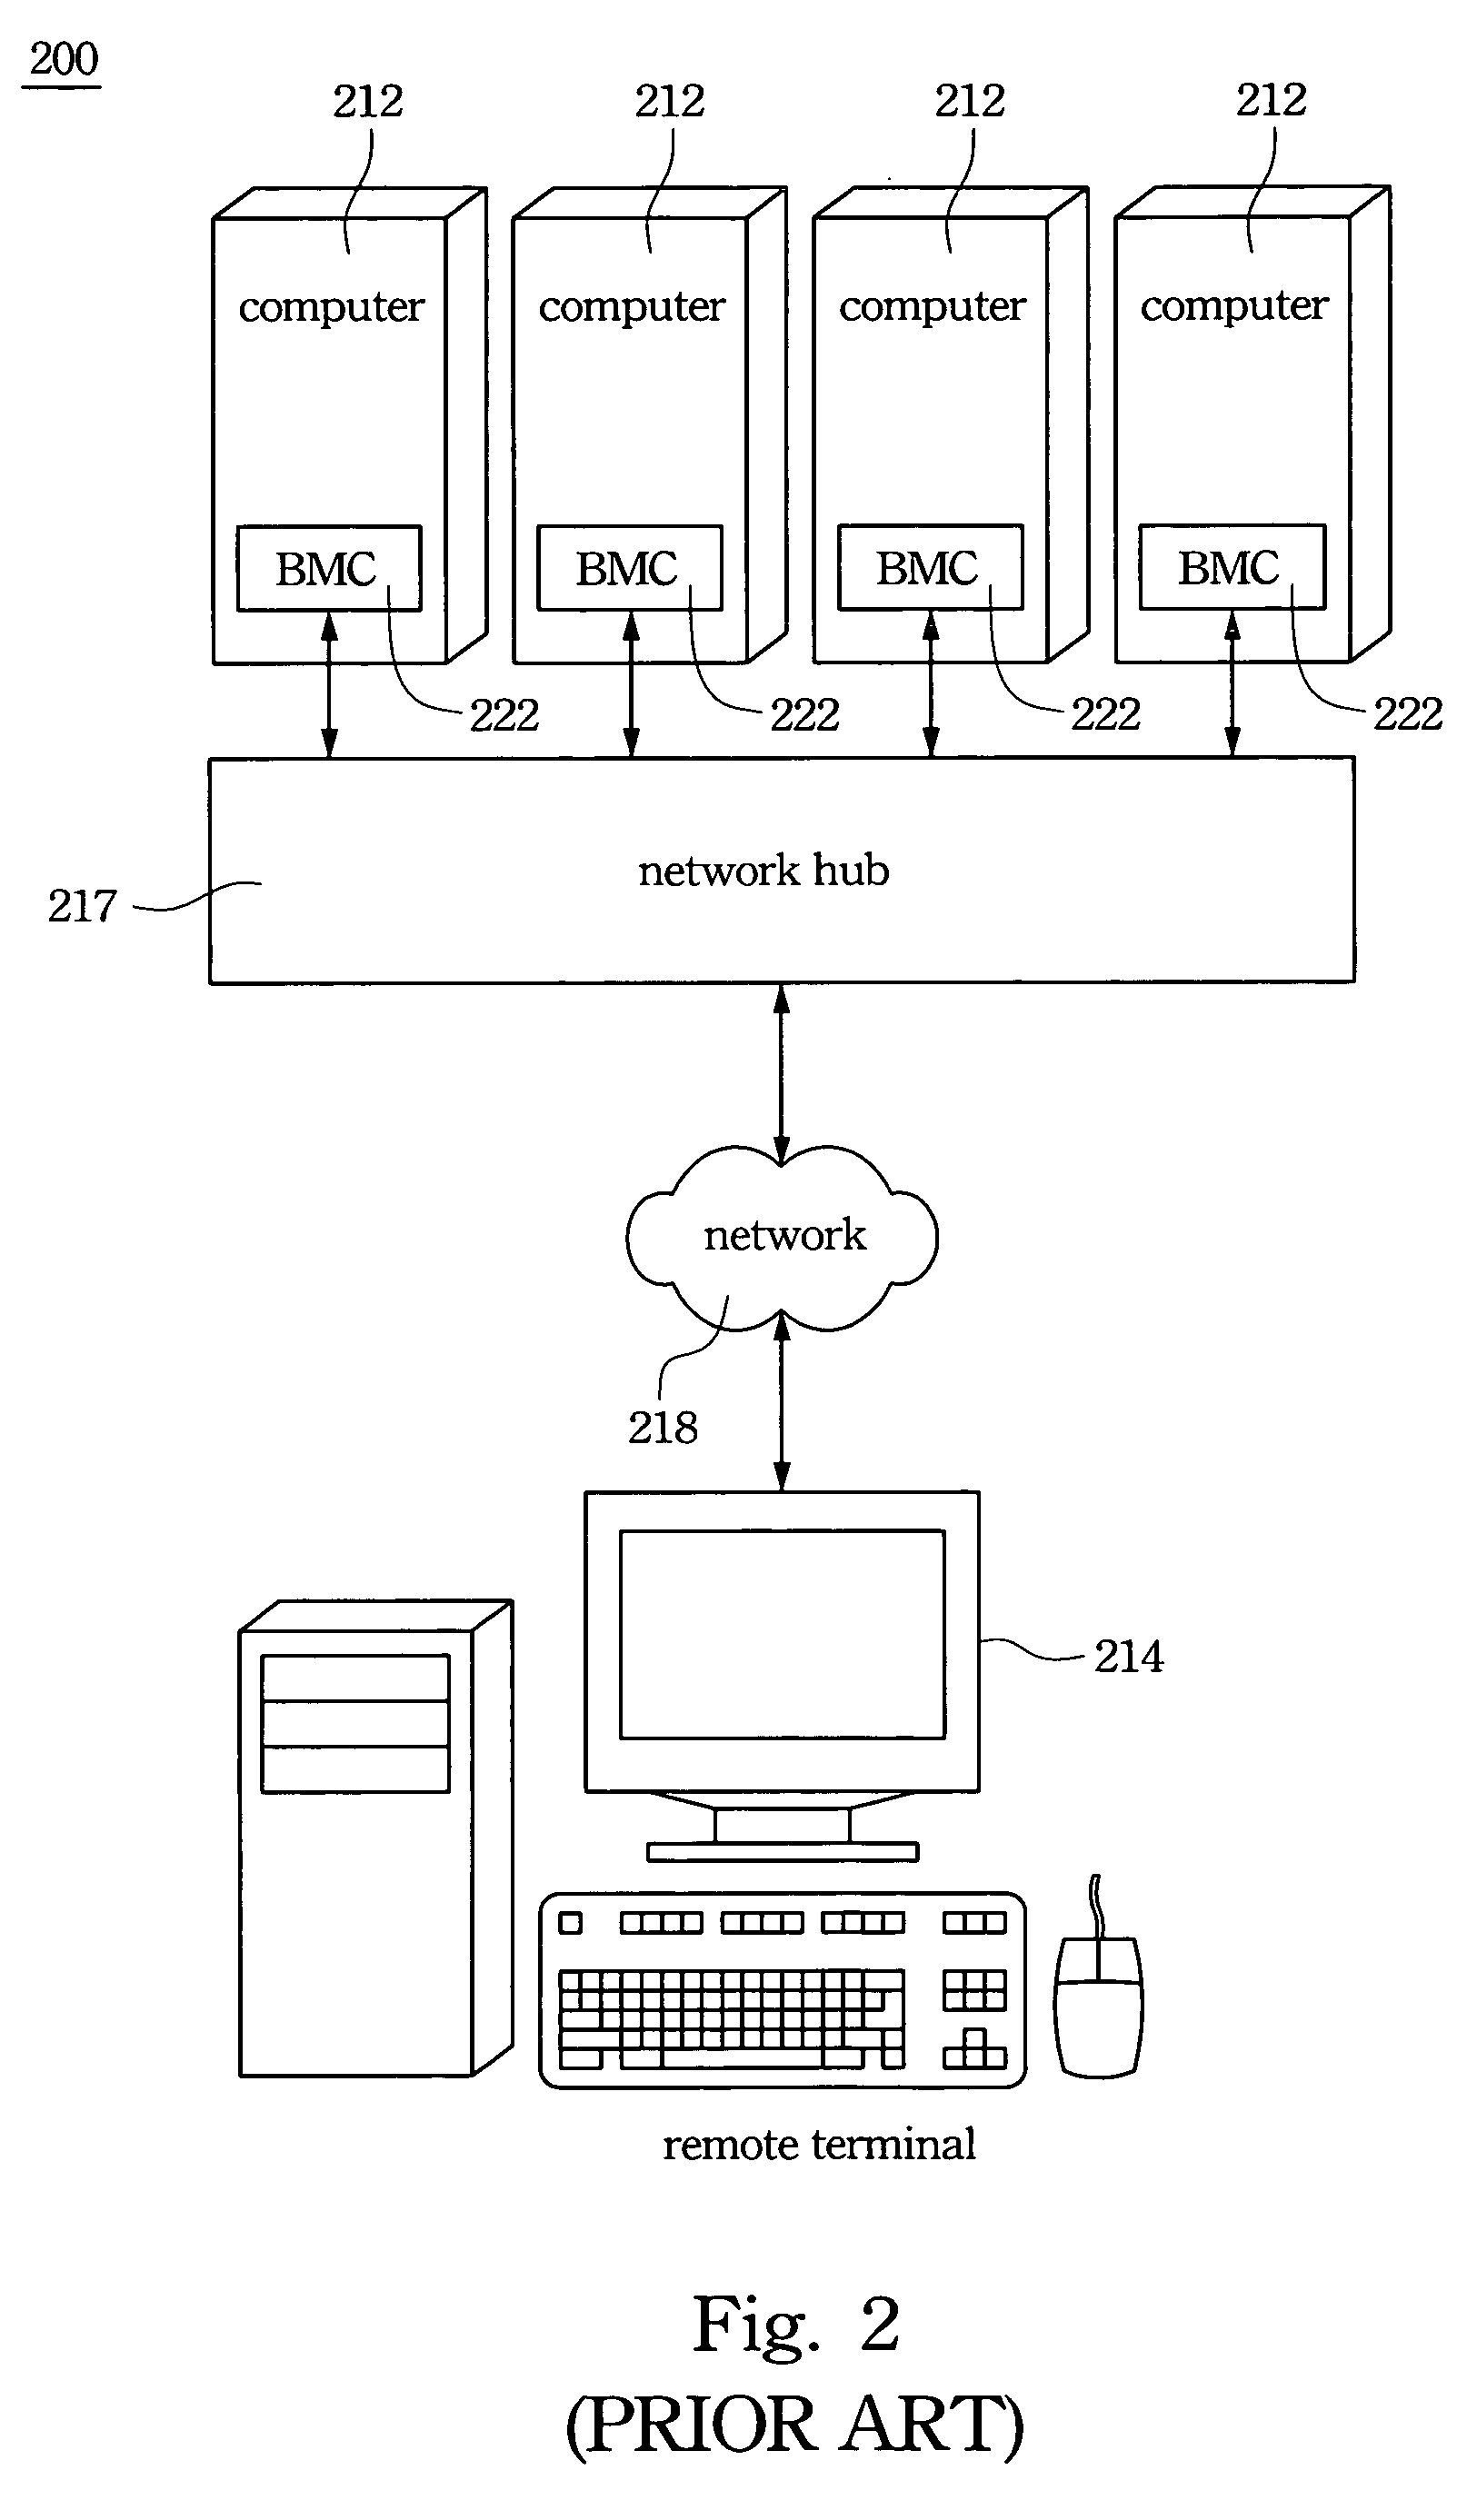 KVM switch supporting IPMI communications with computing devices